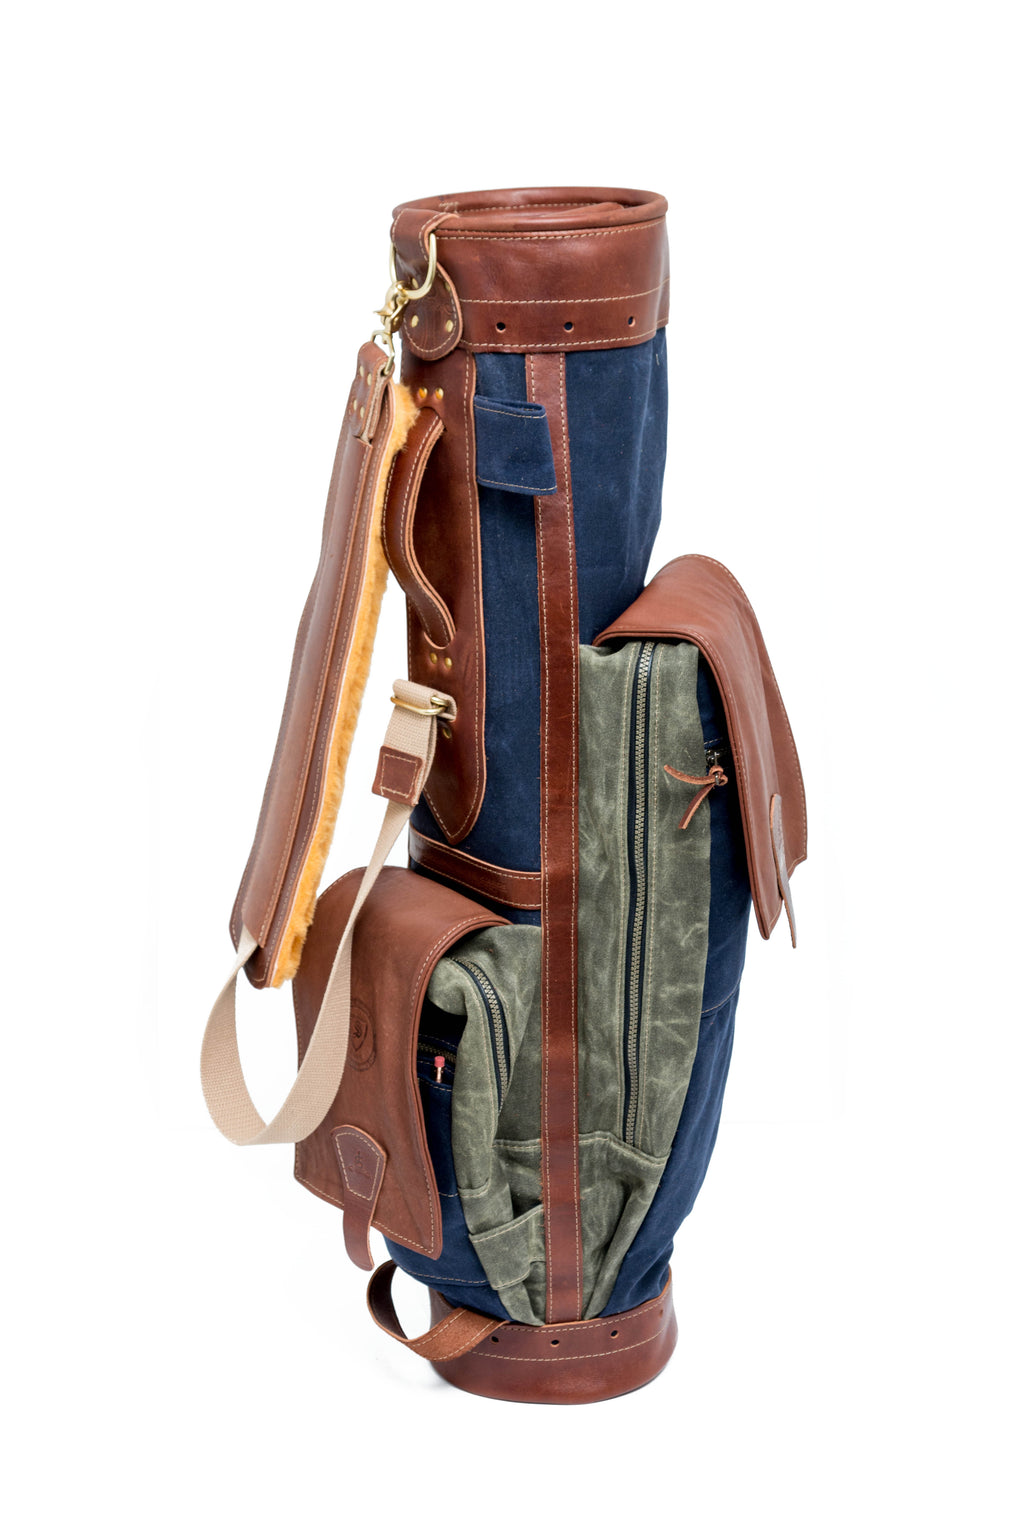 Two-Toned Airliner Style Golf Bag- Steurer & Jacoby